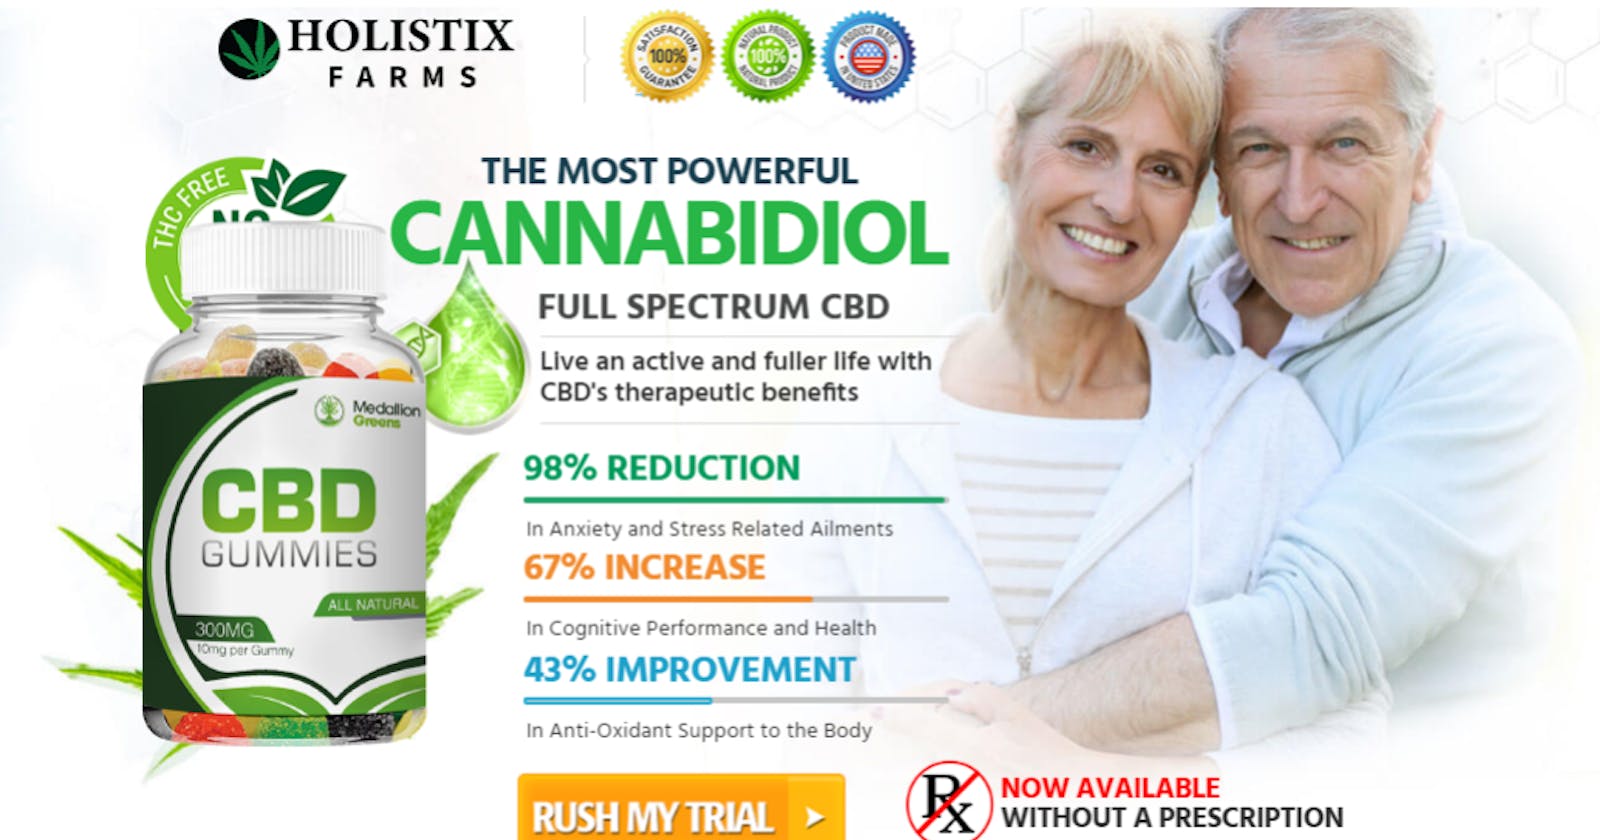 Medallion Greens CBD Gummies Reviews, Cost, Price, Amazon & Official Website?